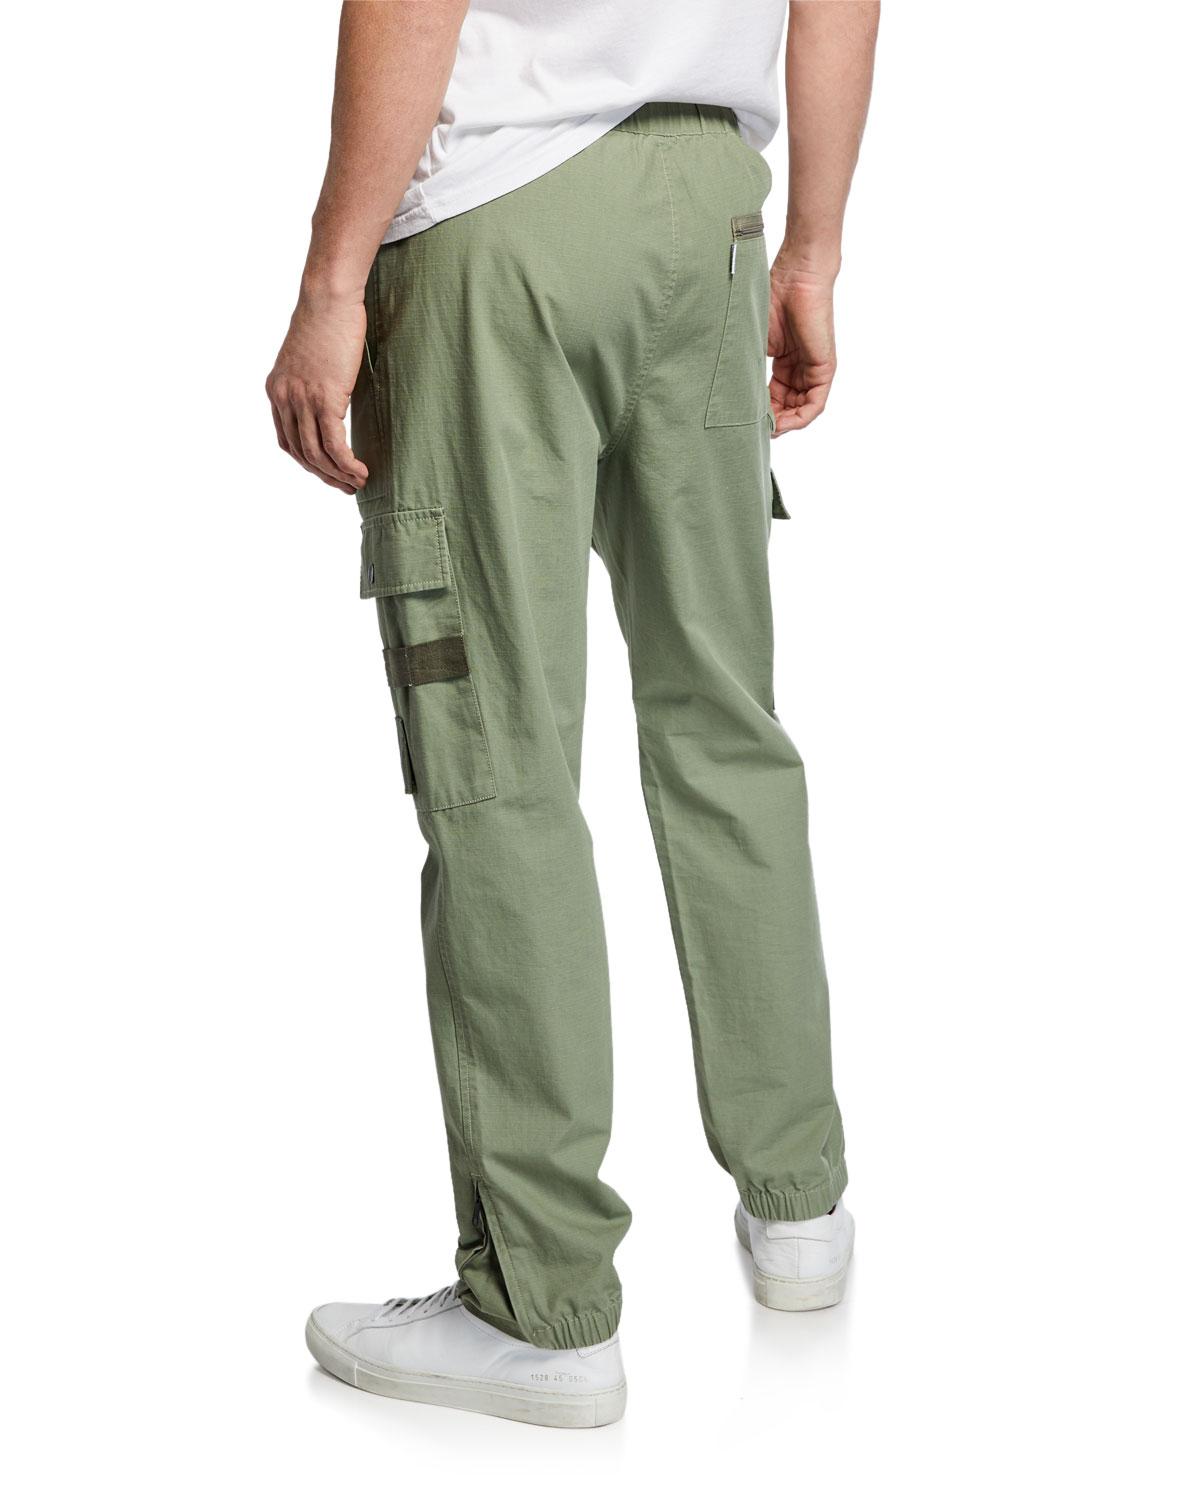 Ovadia And Sons Cotton Men's Parachute Cargo Pants in Olive (Green) for ...